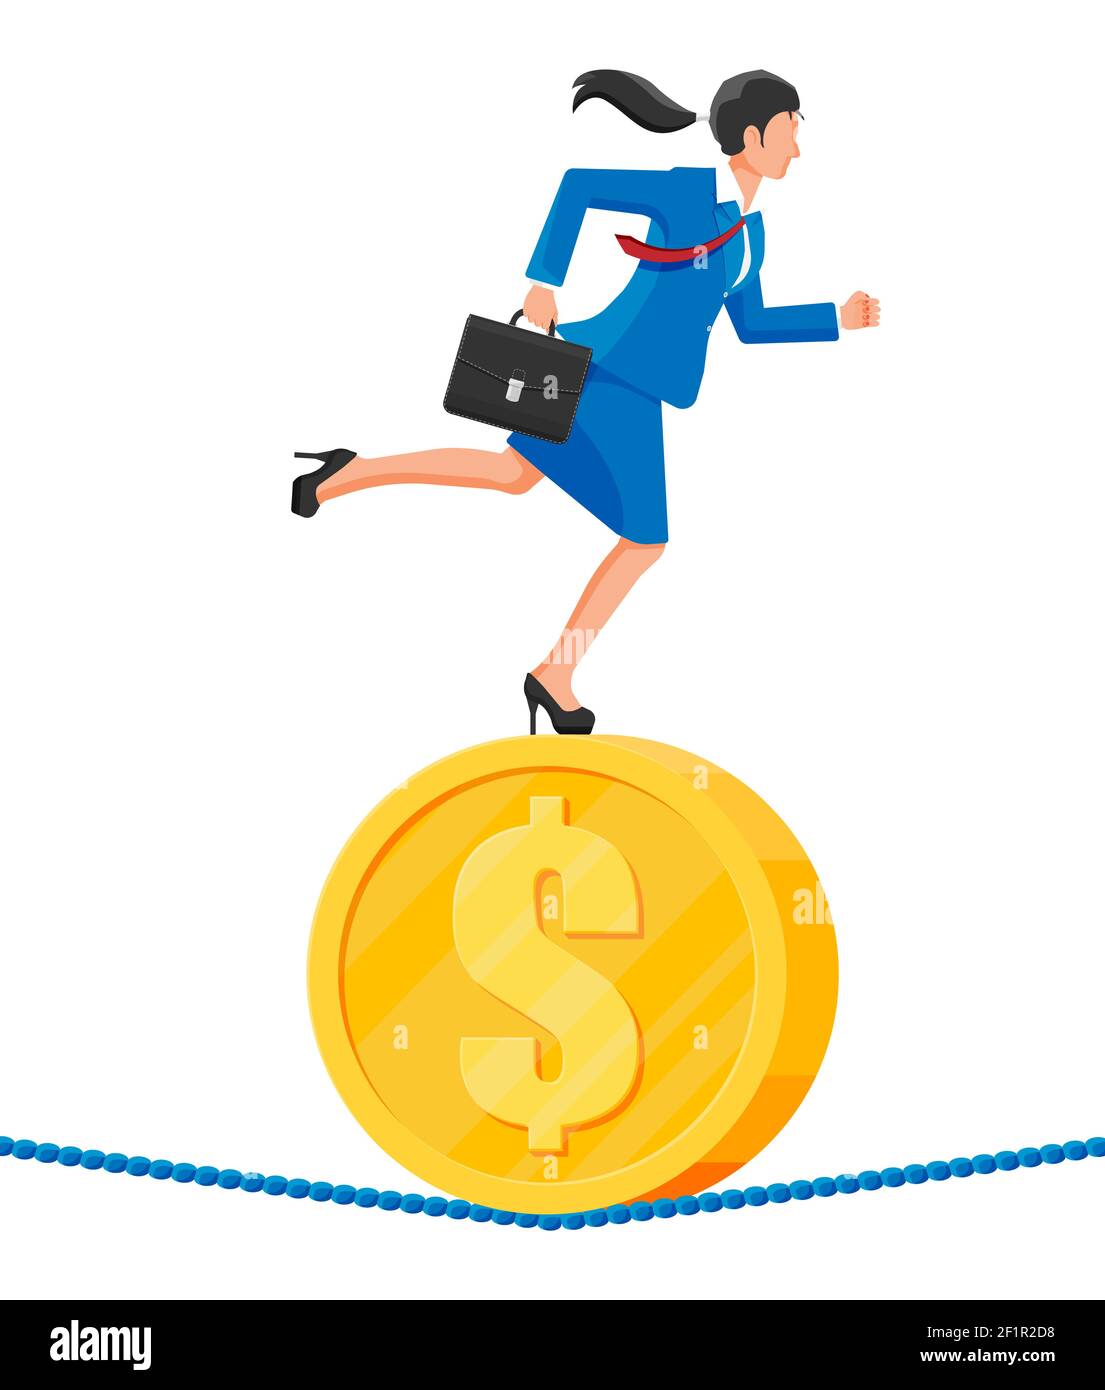 Businesswoman on coin walking on rope with suitcase. Business woman walking on tightrope gap. Obstacle on road, financial crisis. Risk management challenge. Vector illustration in flat style Stock Vector